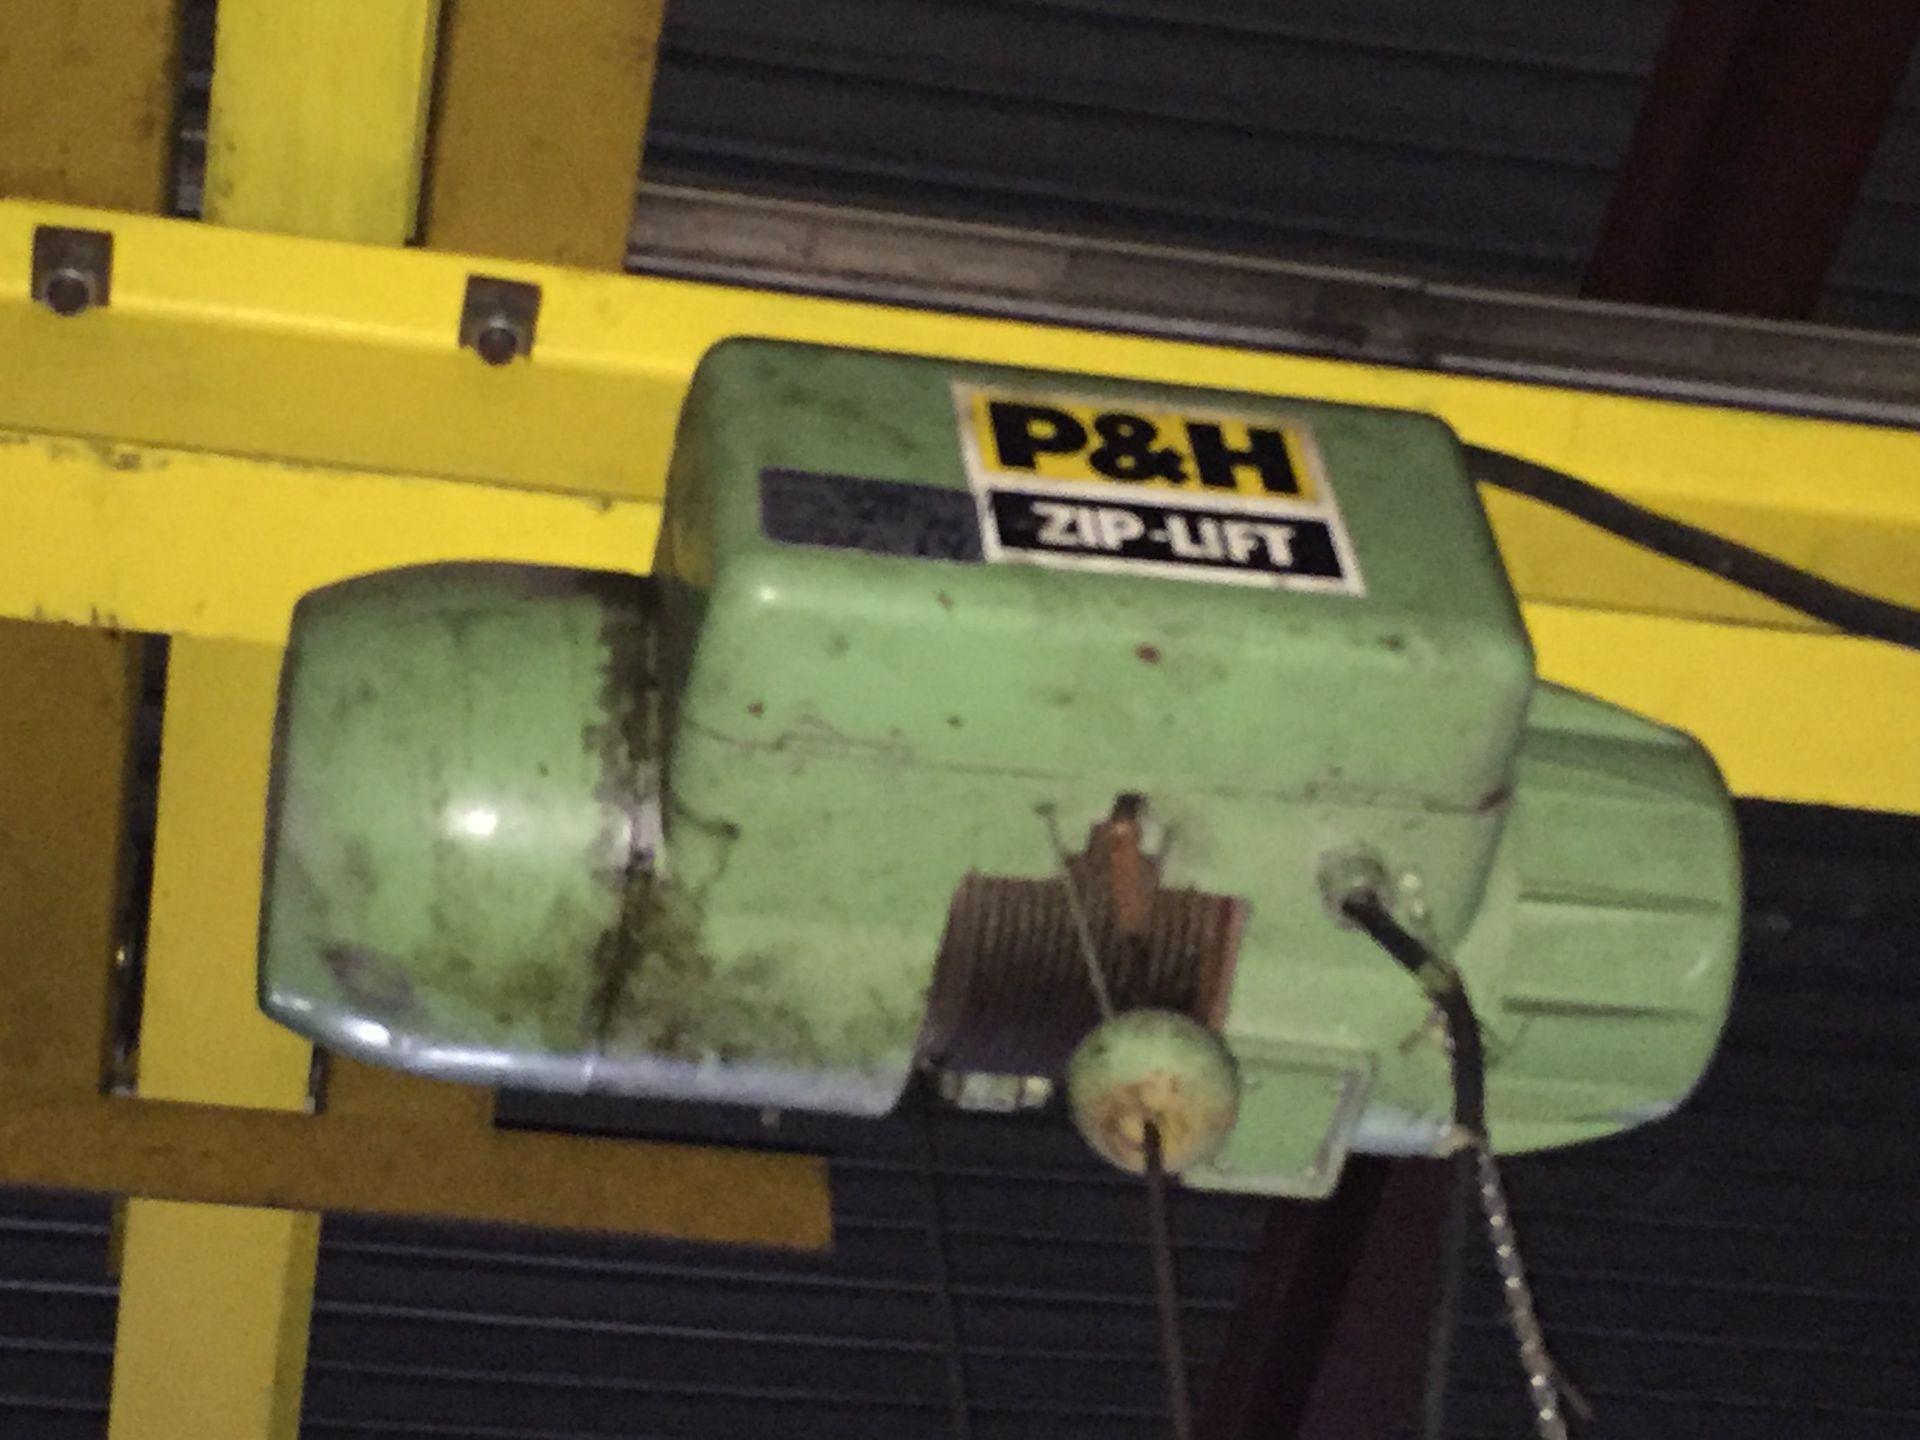 P & H ZIP LIFT 2 TON OVERHEAD CRANE SYSTEM, READY TO LOAD. - Image 5 of 6